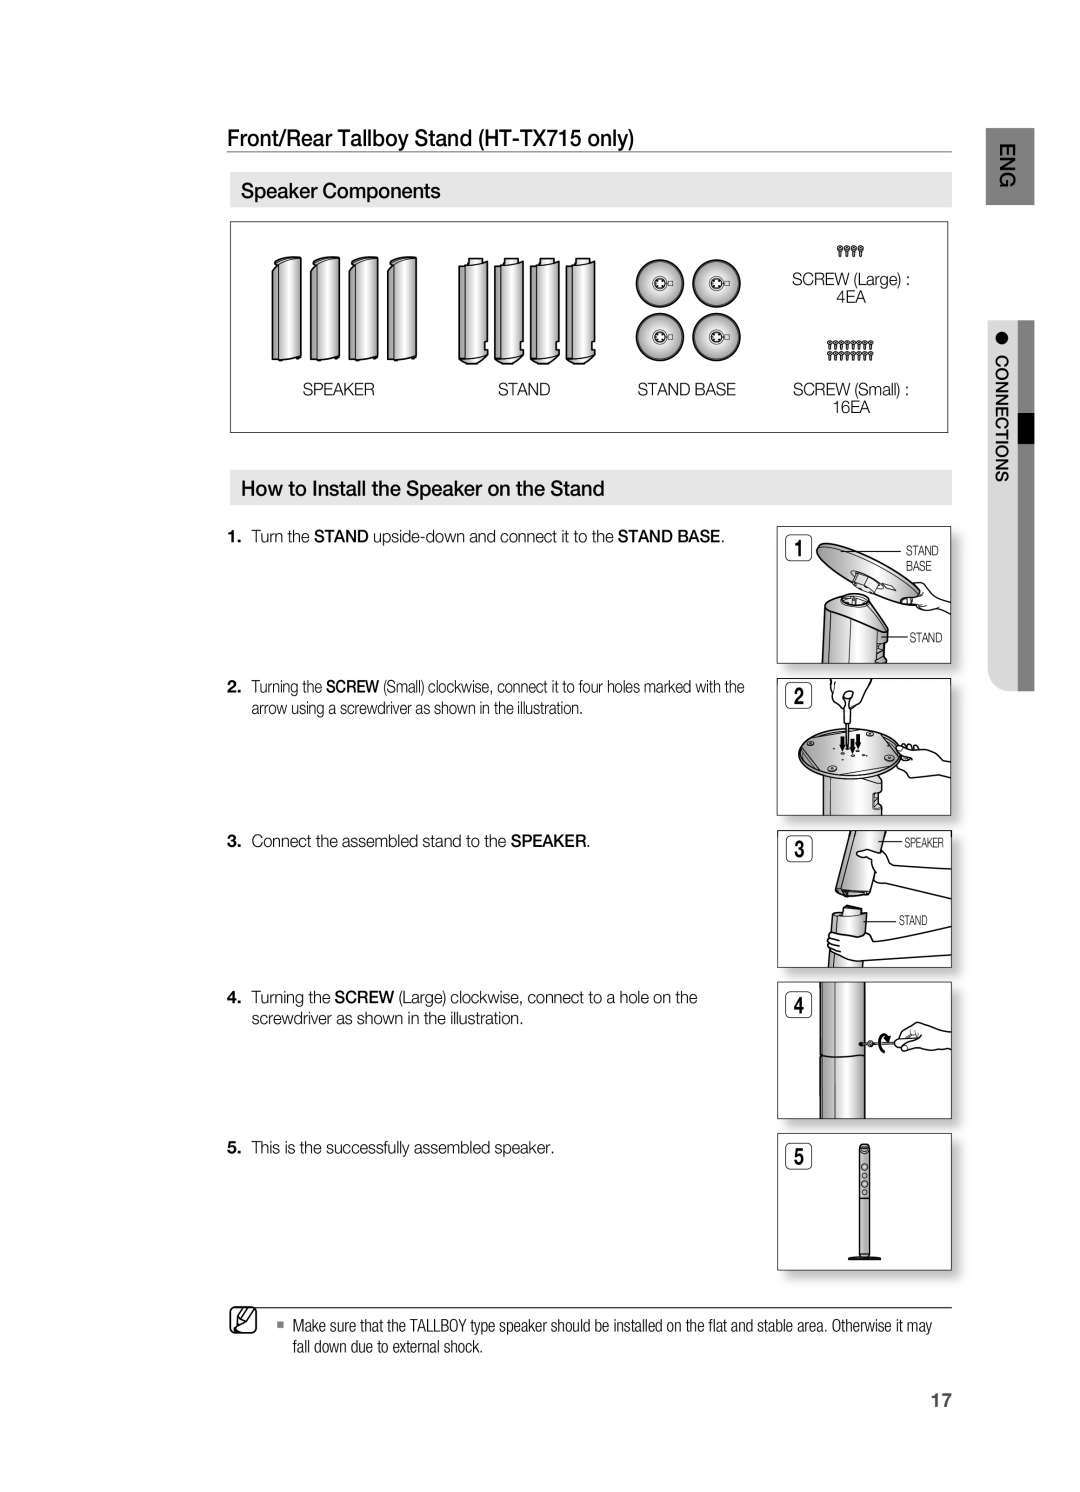 Samsung user manual Front/rear Tallboy Stand HT-TX715only, Speaker Components, How to Install the Speaker on the Stand 